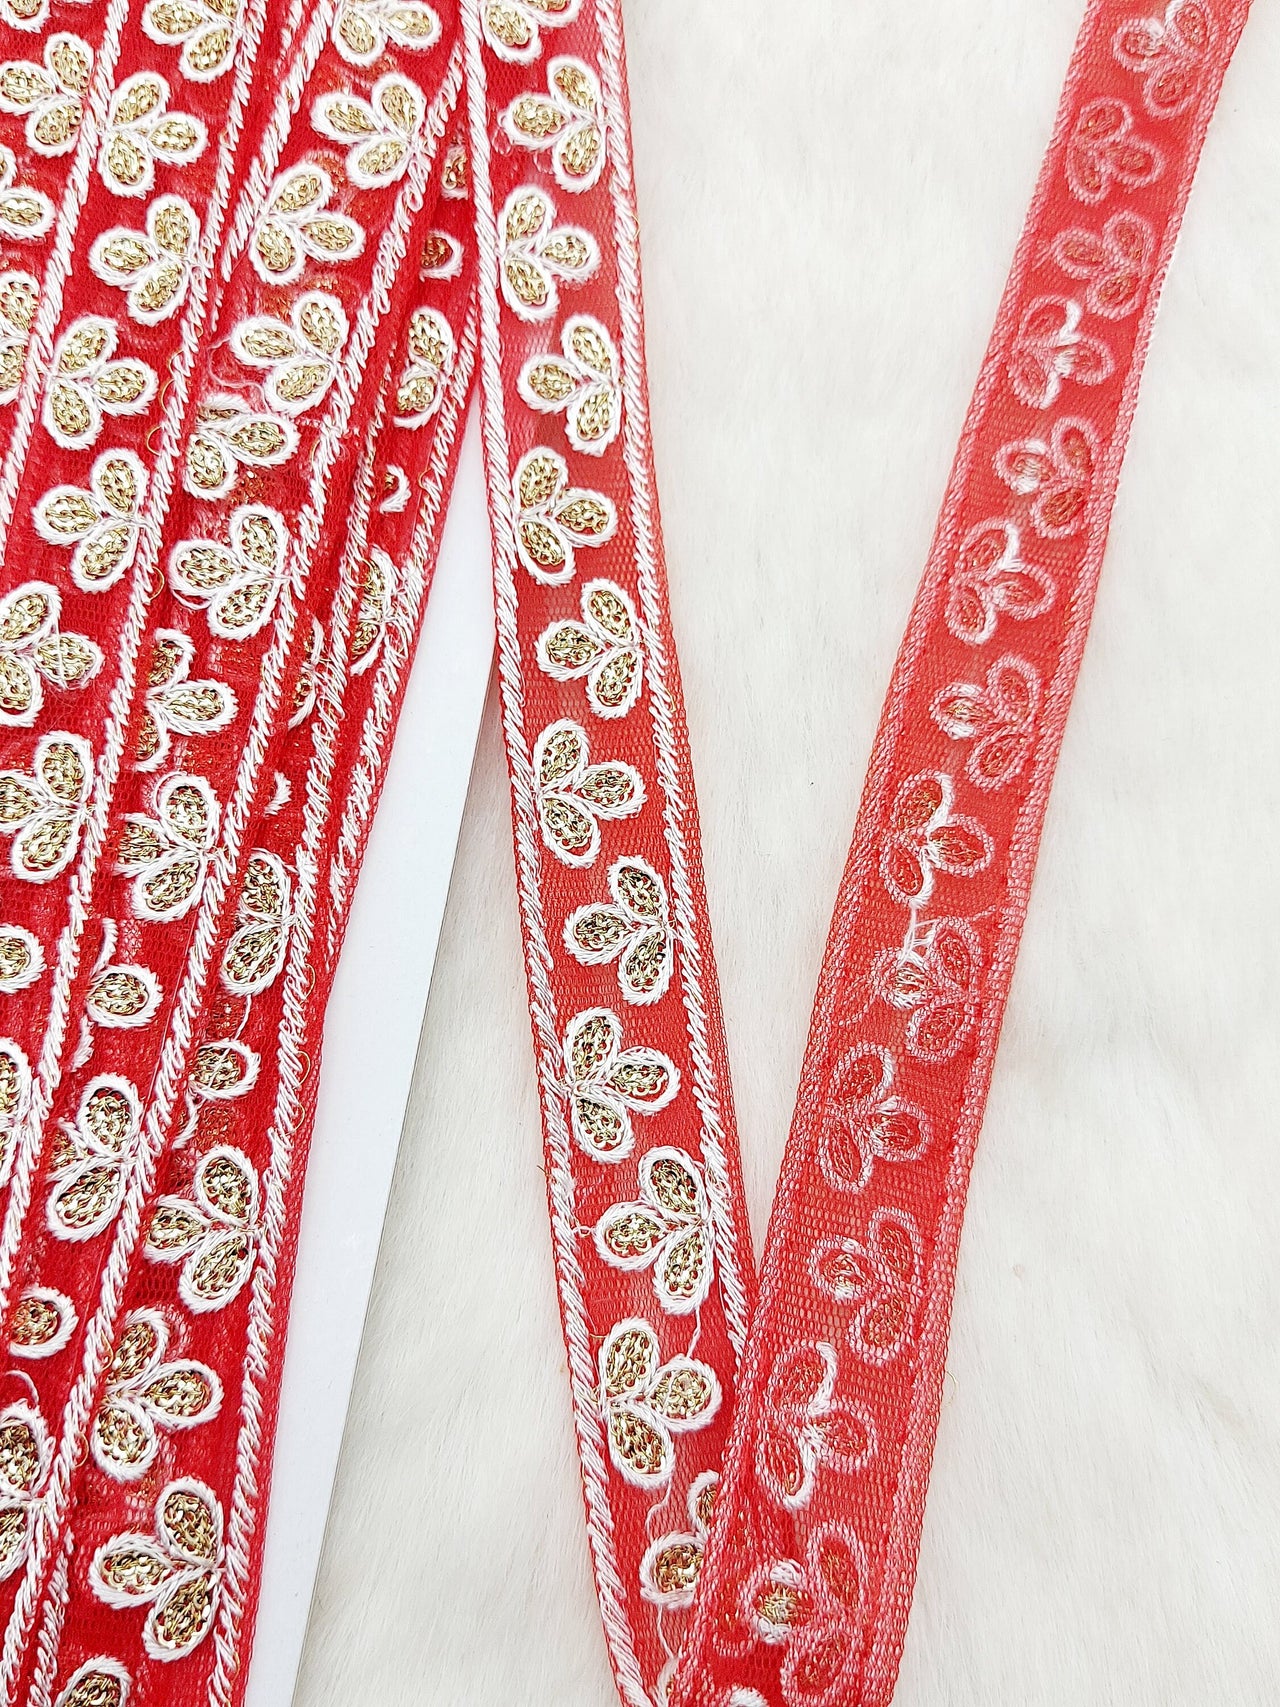 Wholesale Red Net Lace Floral Embroidery & Glitter Gold Sequins, Indian Wedding Border, Gifting Ribbon Costume Trim Fashion Trimming